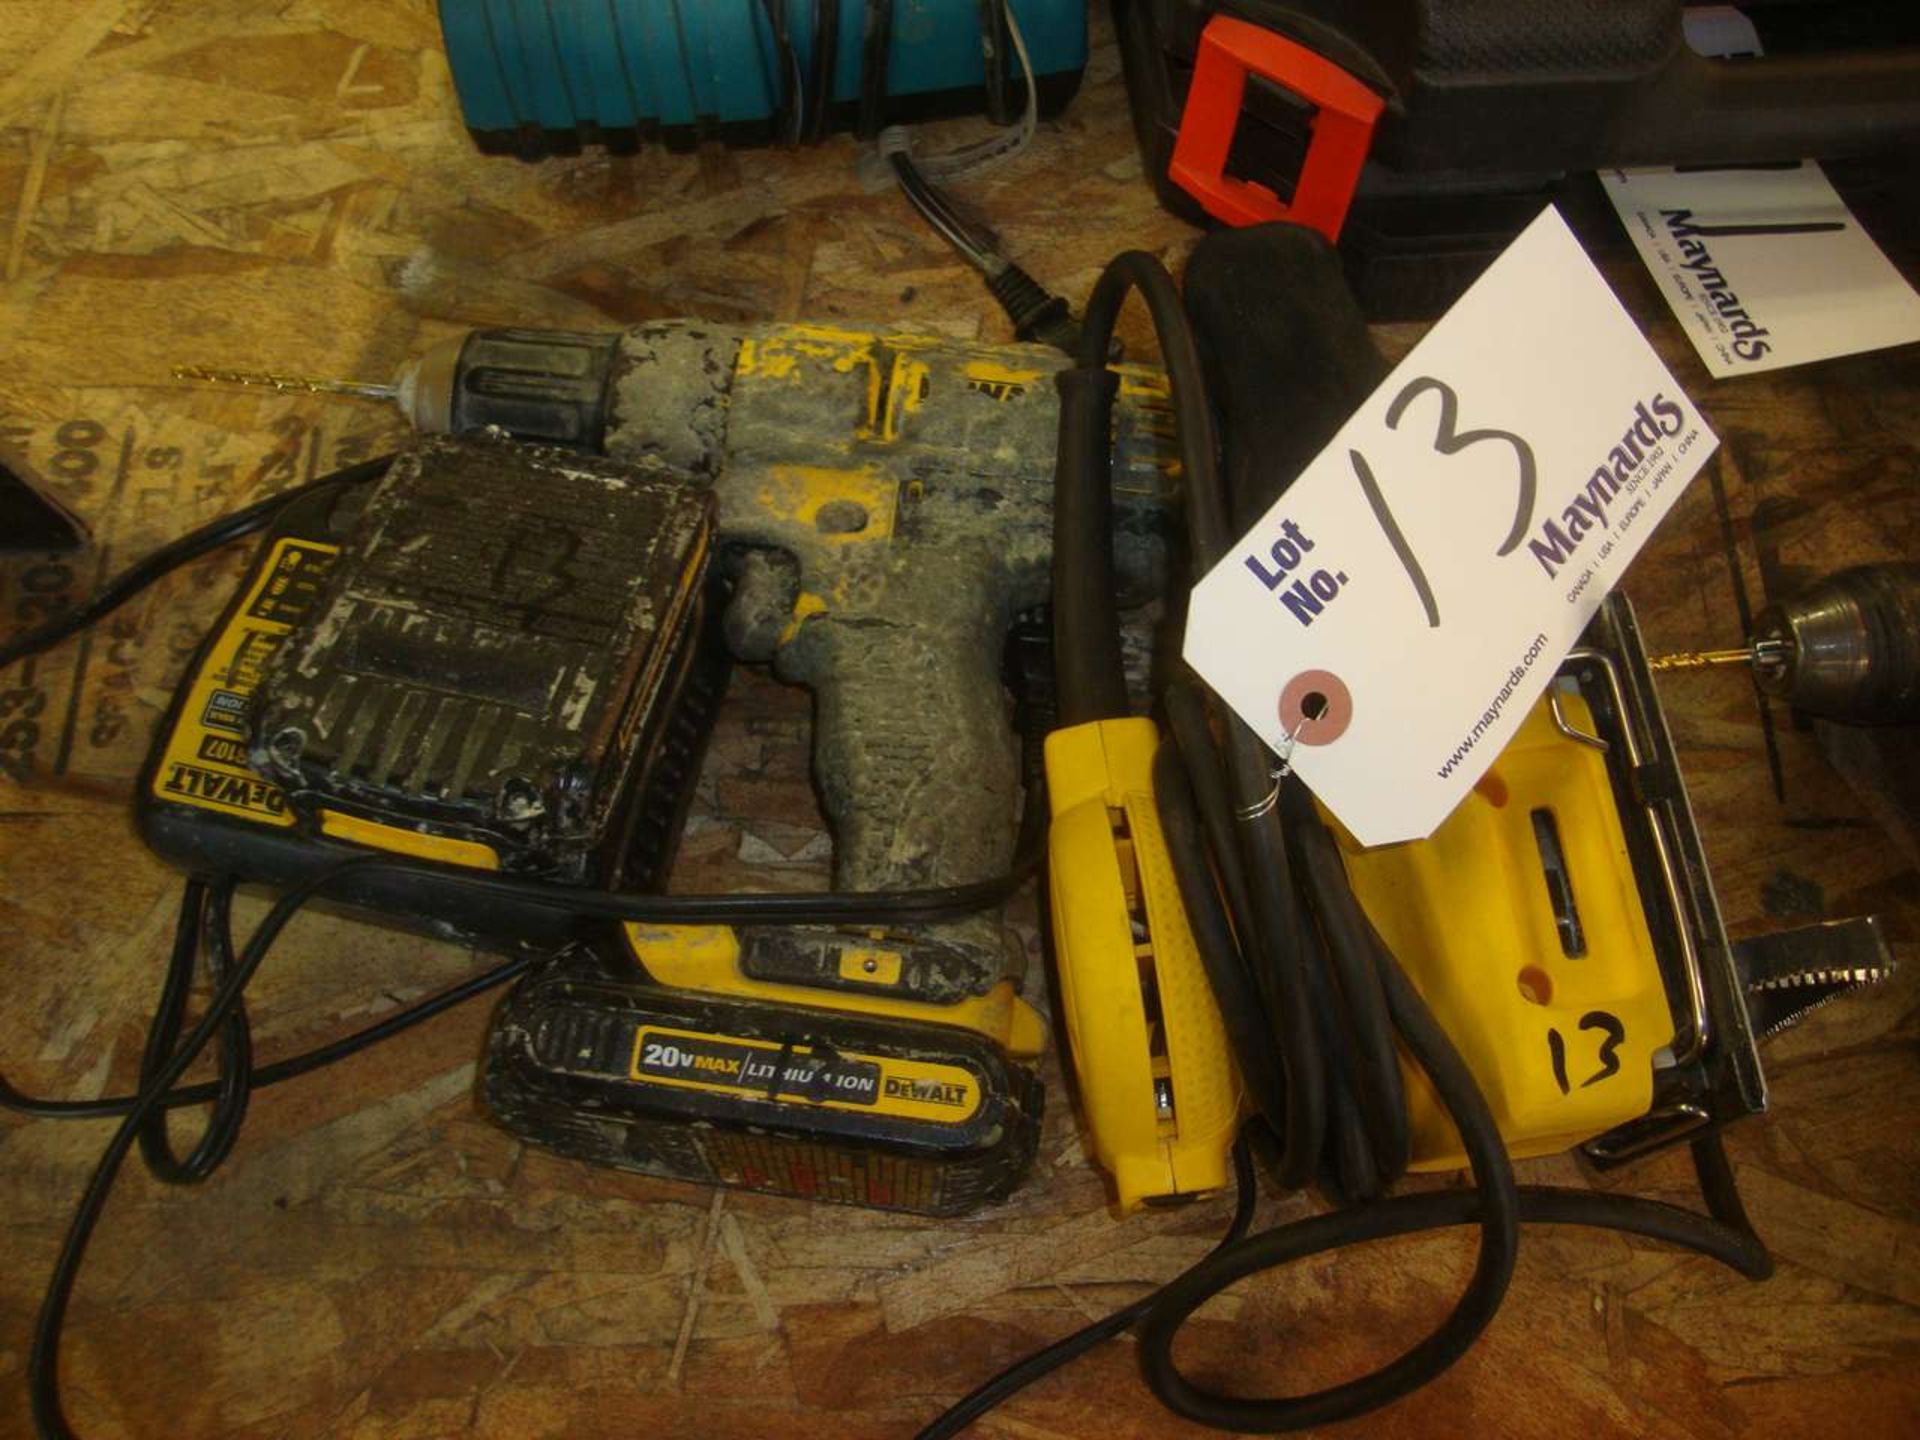 Dewalt Palm sander and rechargeable drill